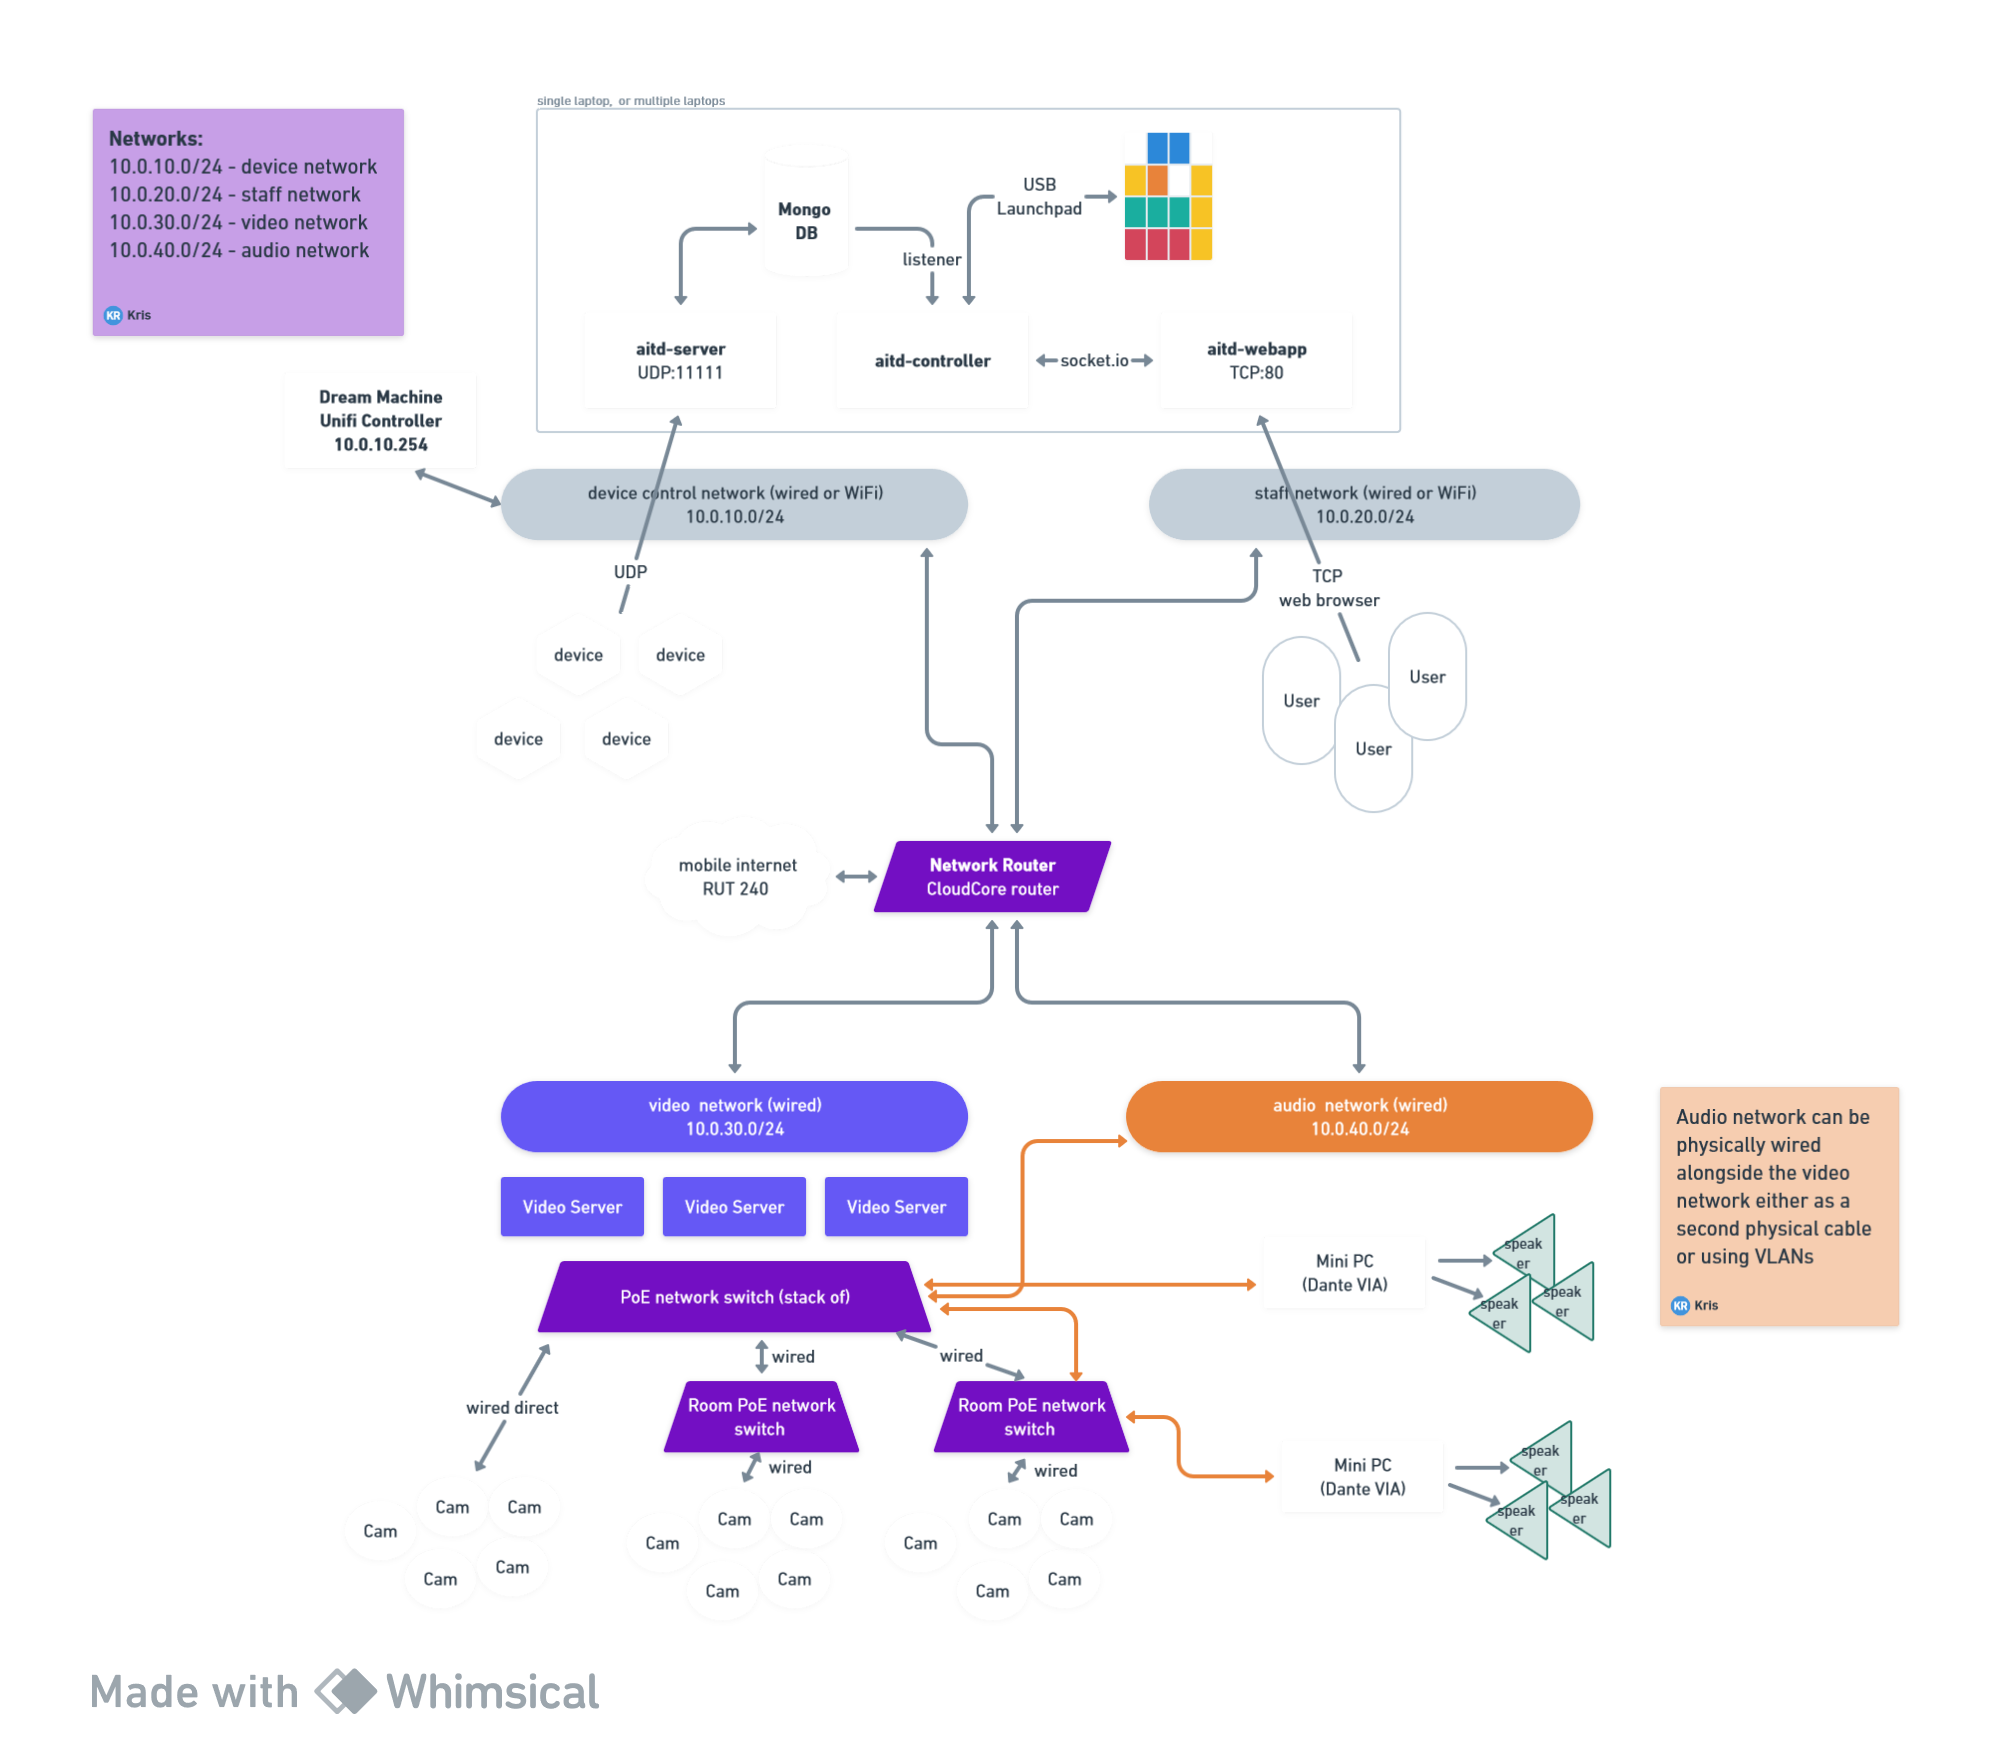 The system architecture